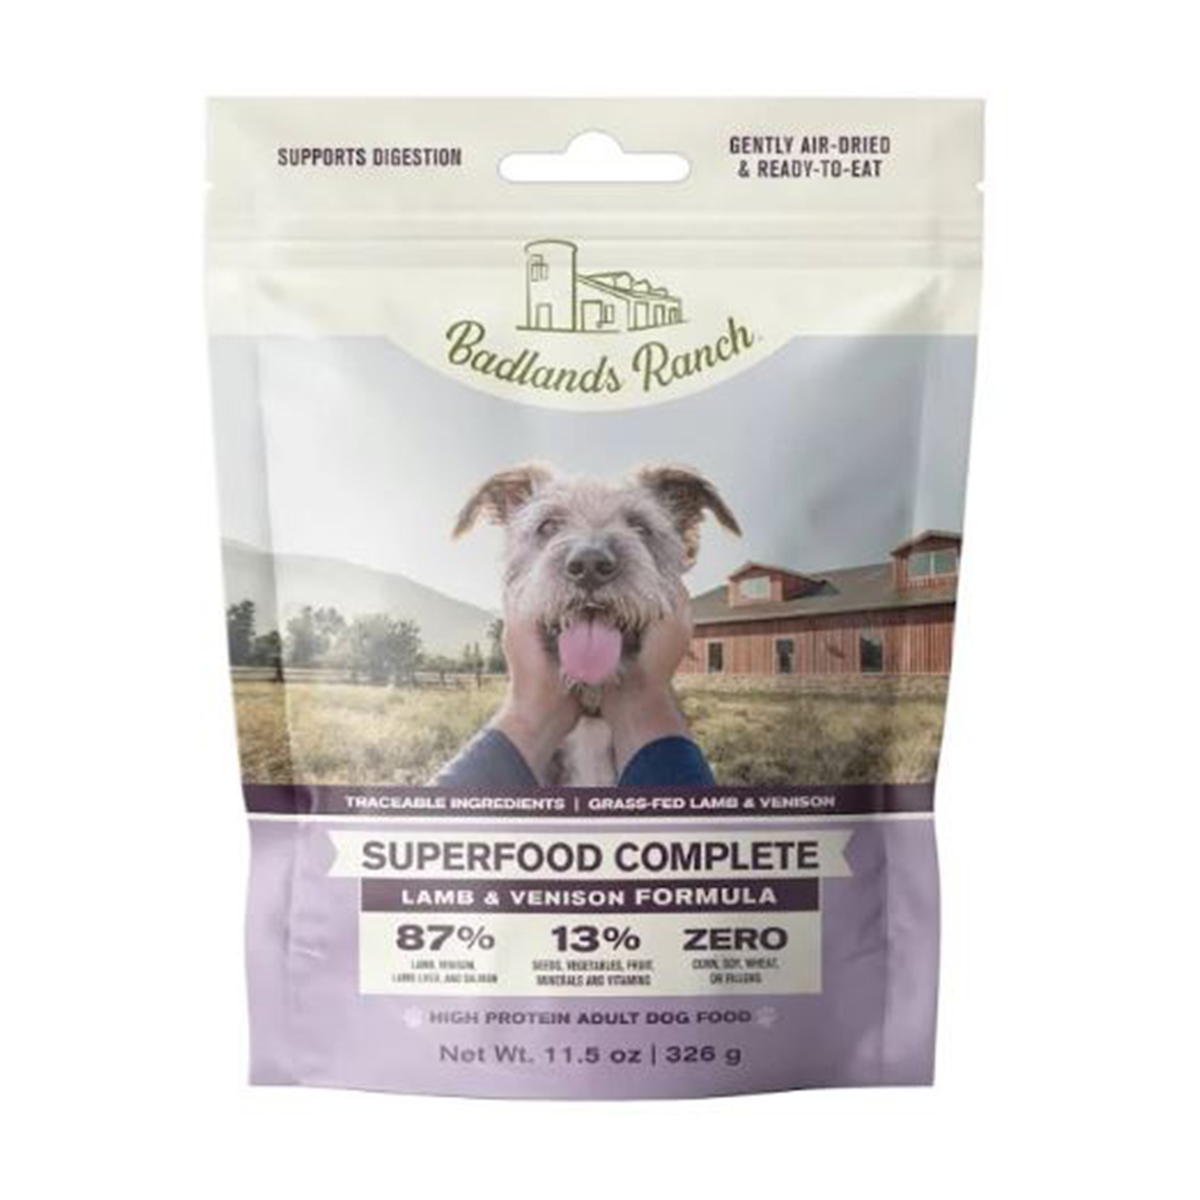 Badlands Ranch Superfood Complete Air Dried Dog Food - Lamb & Venison